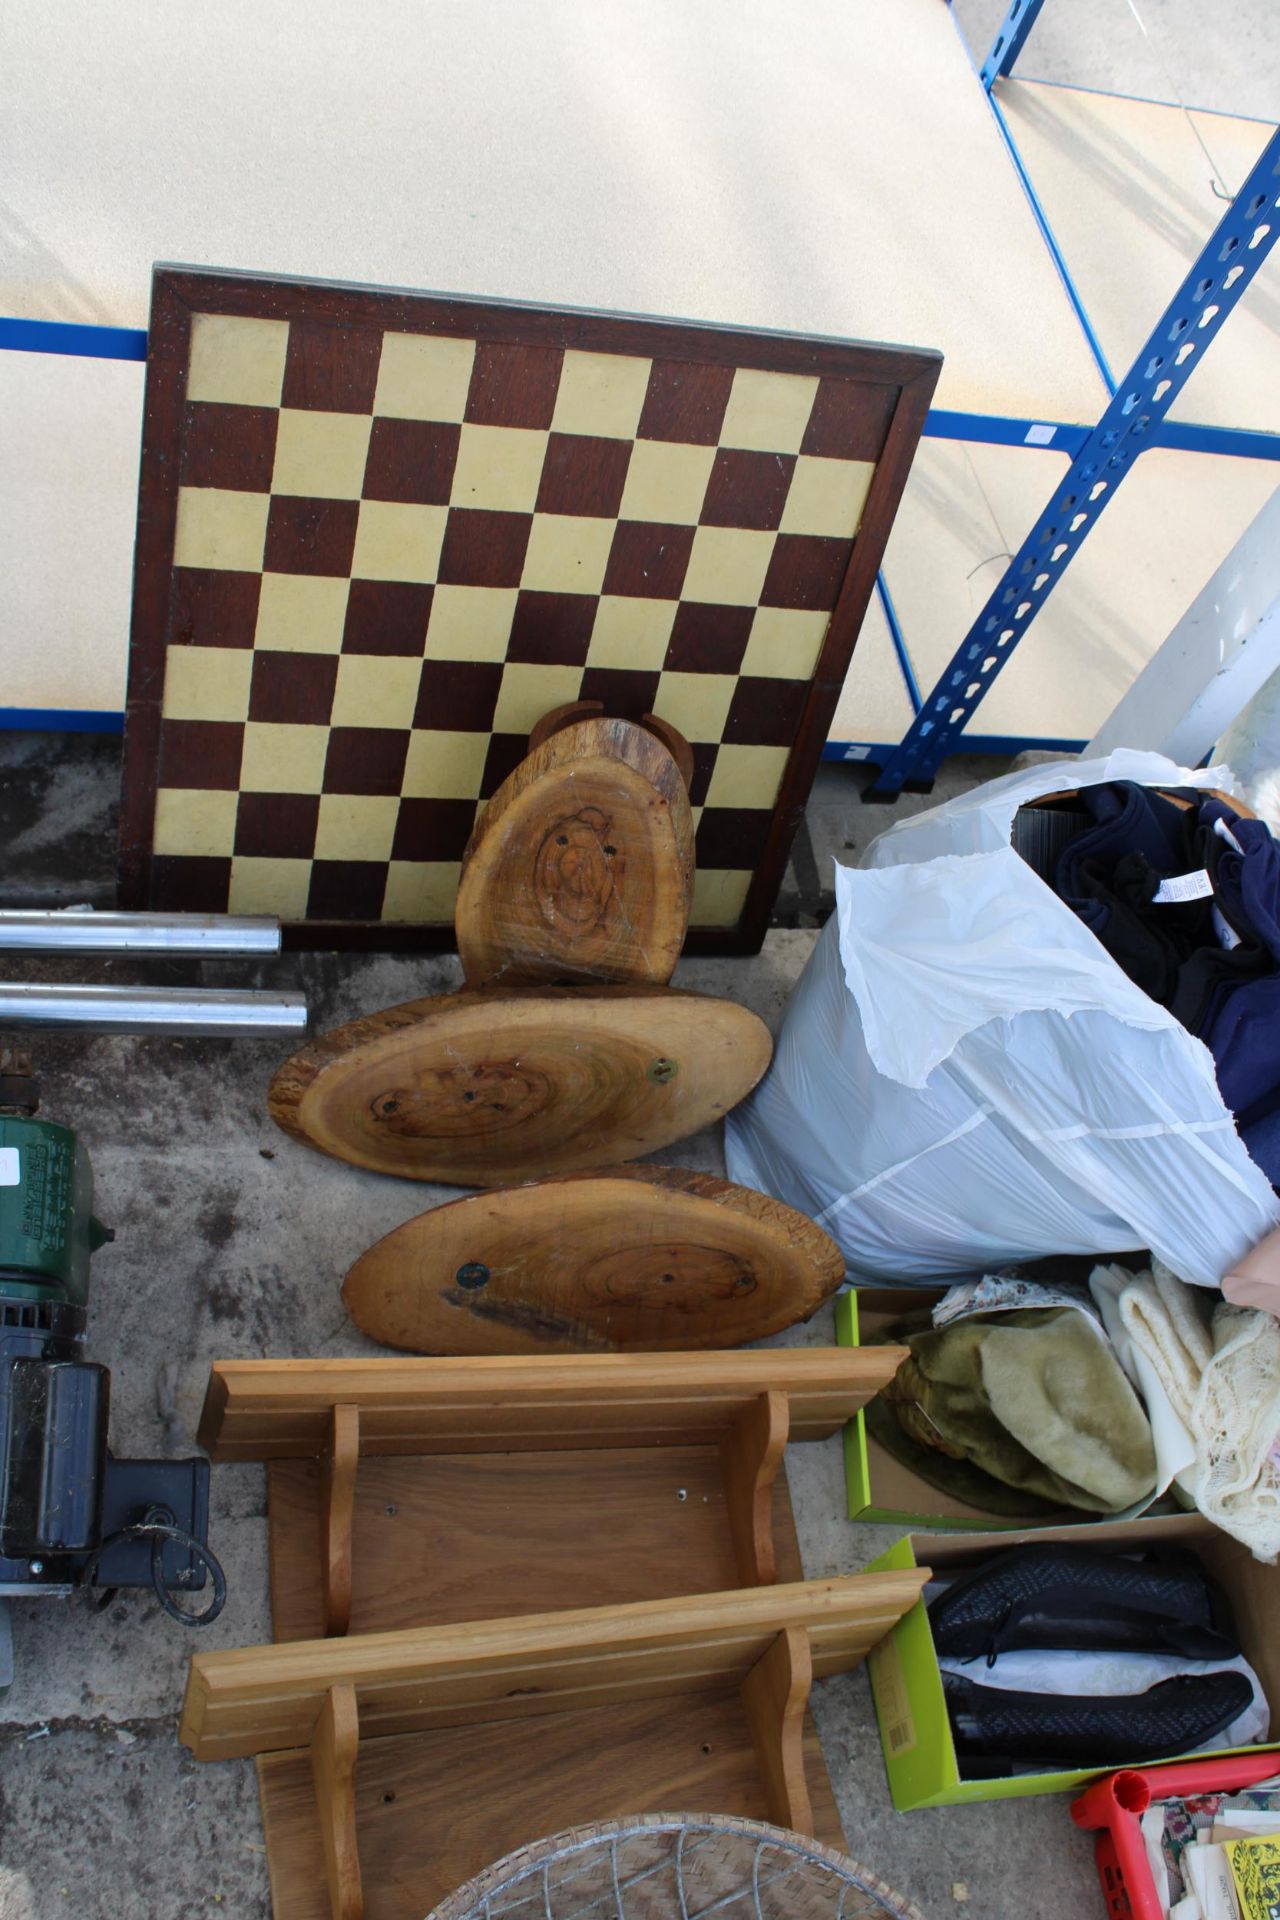 AN ASSORTMENT OF ITEMS TO INCLUDE WOODEN SHELVES, A CHESS BOARD AND ARTIFICIAL FLOWERS ETC - Image 2 of 4